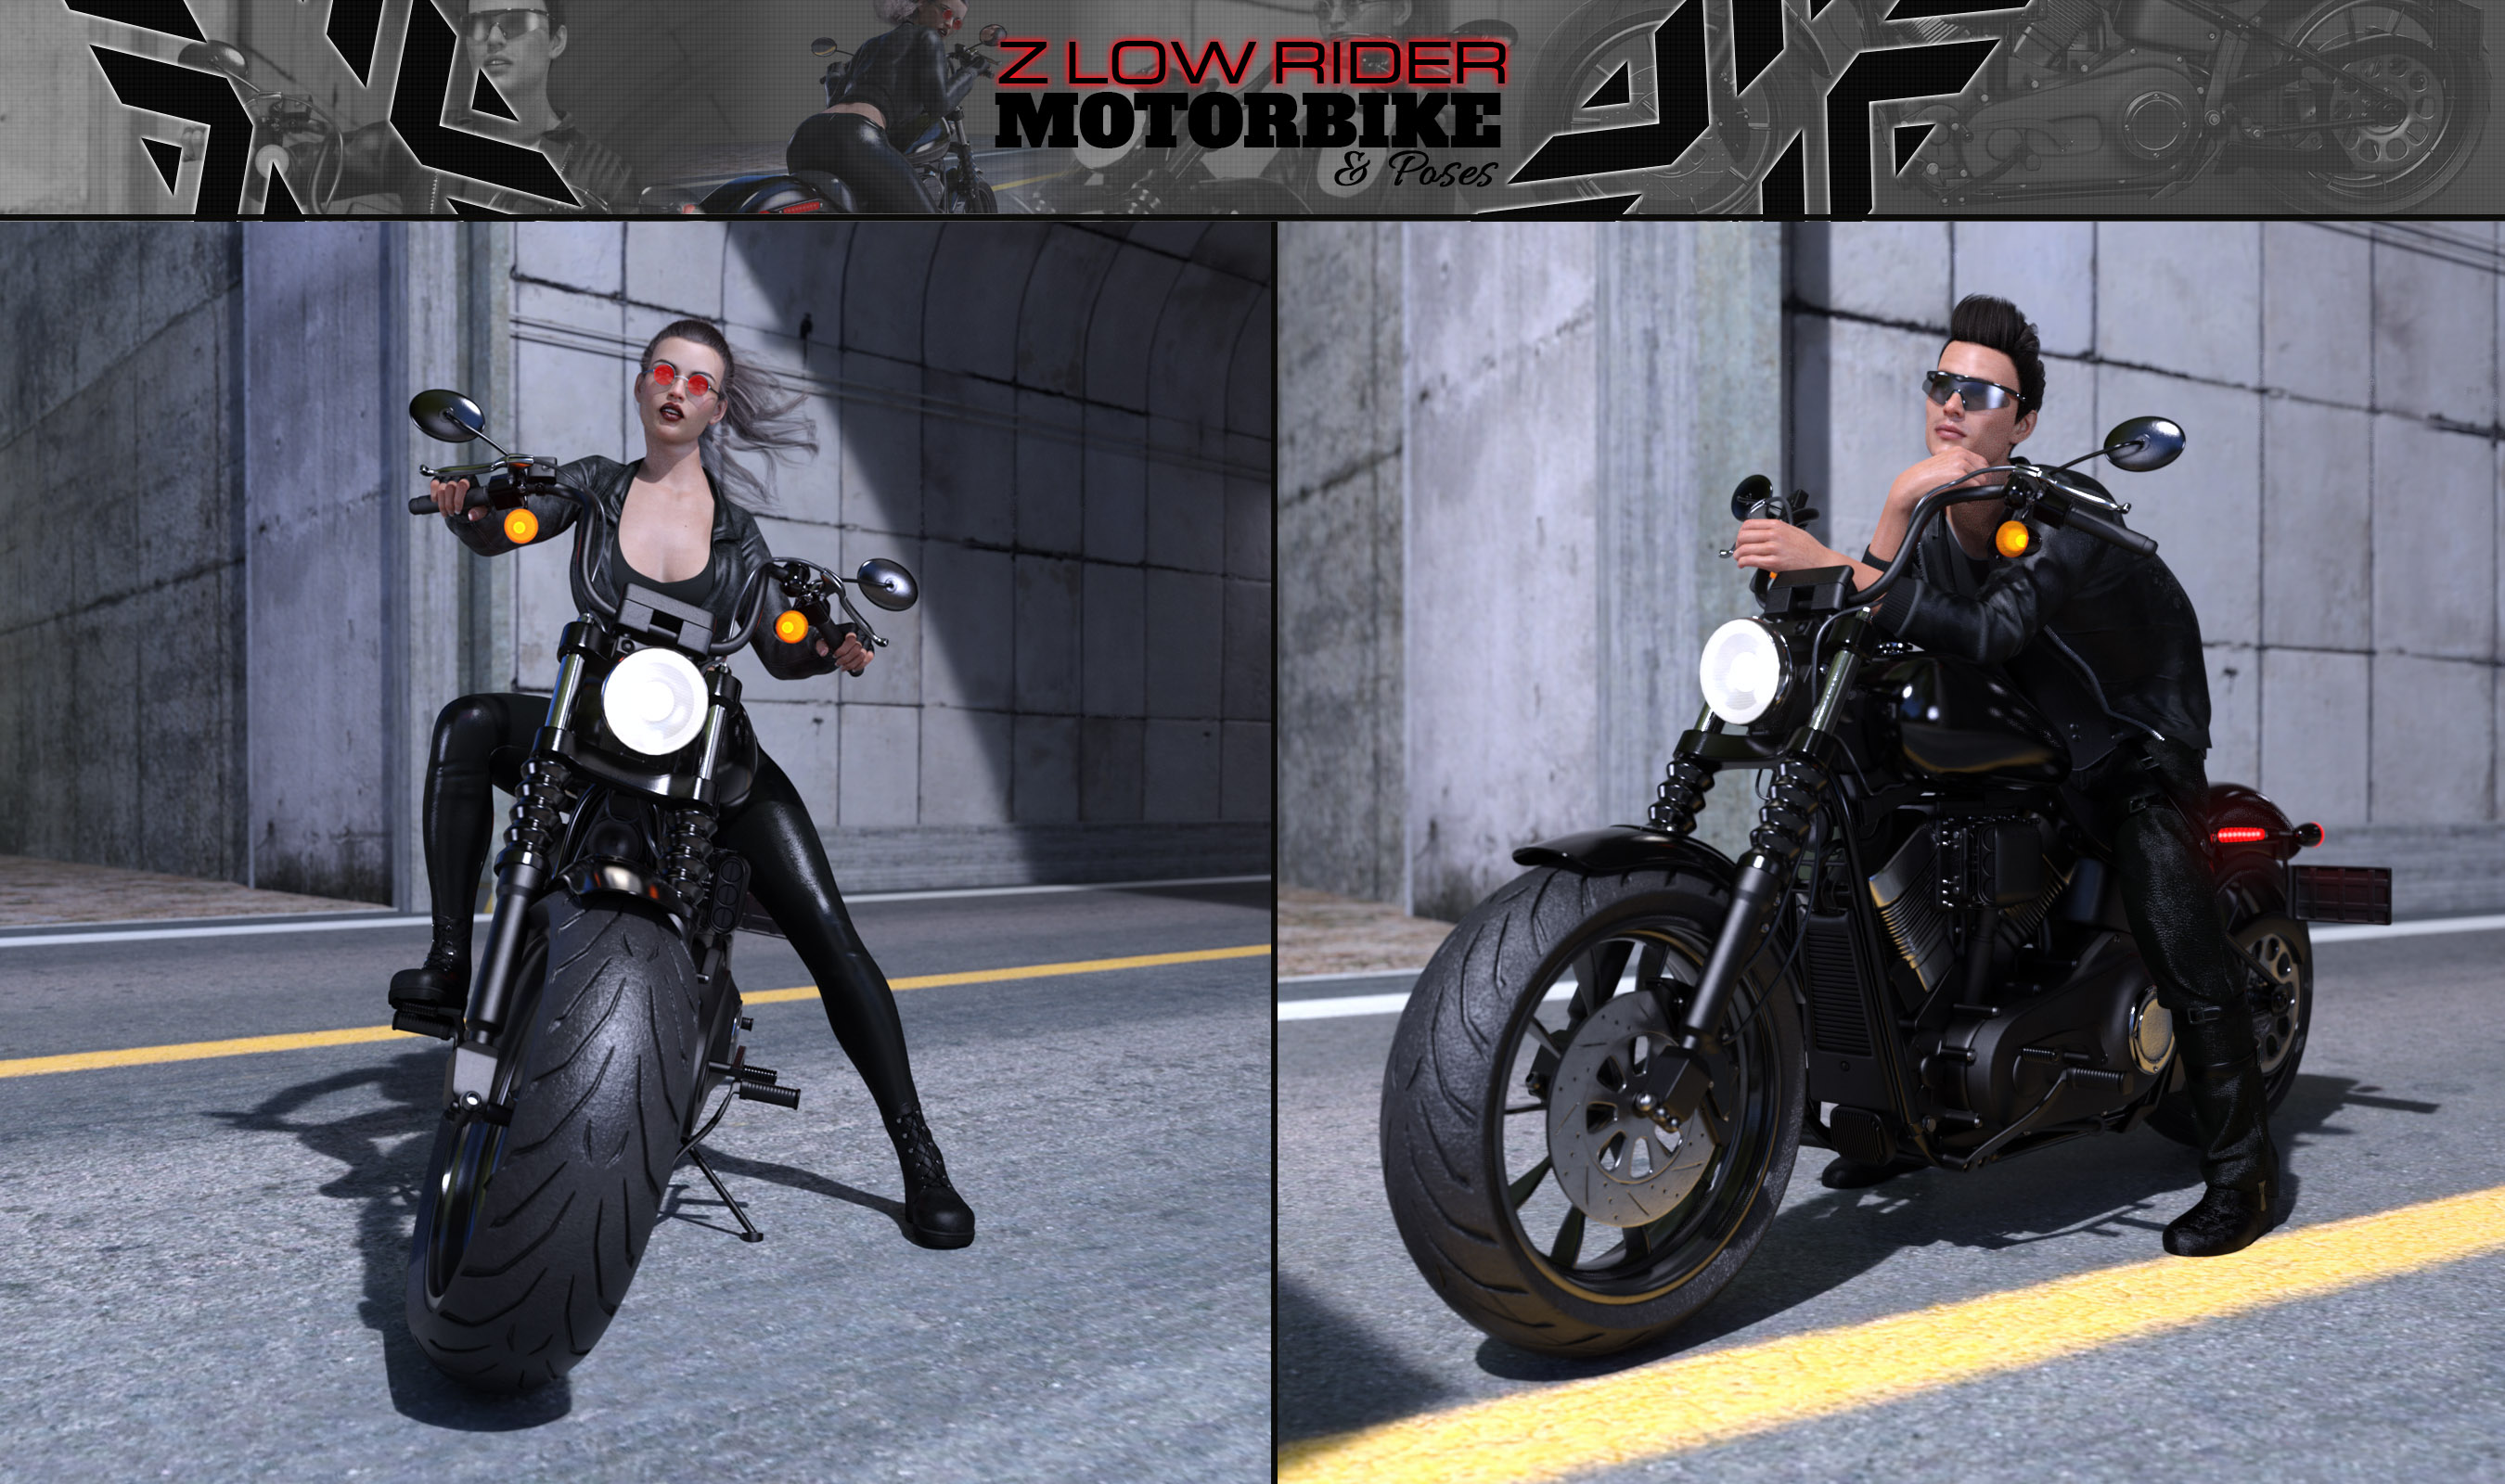 Z Low Rider Motorbike and Poses by: Zeddicuss, 3D Models by Daz 3D